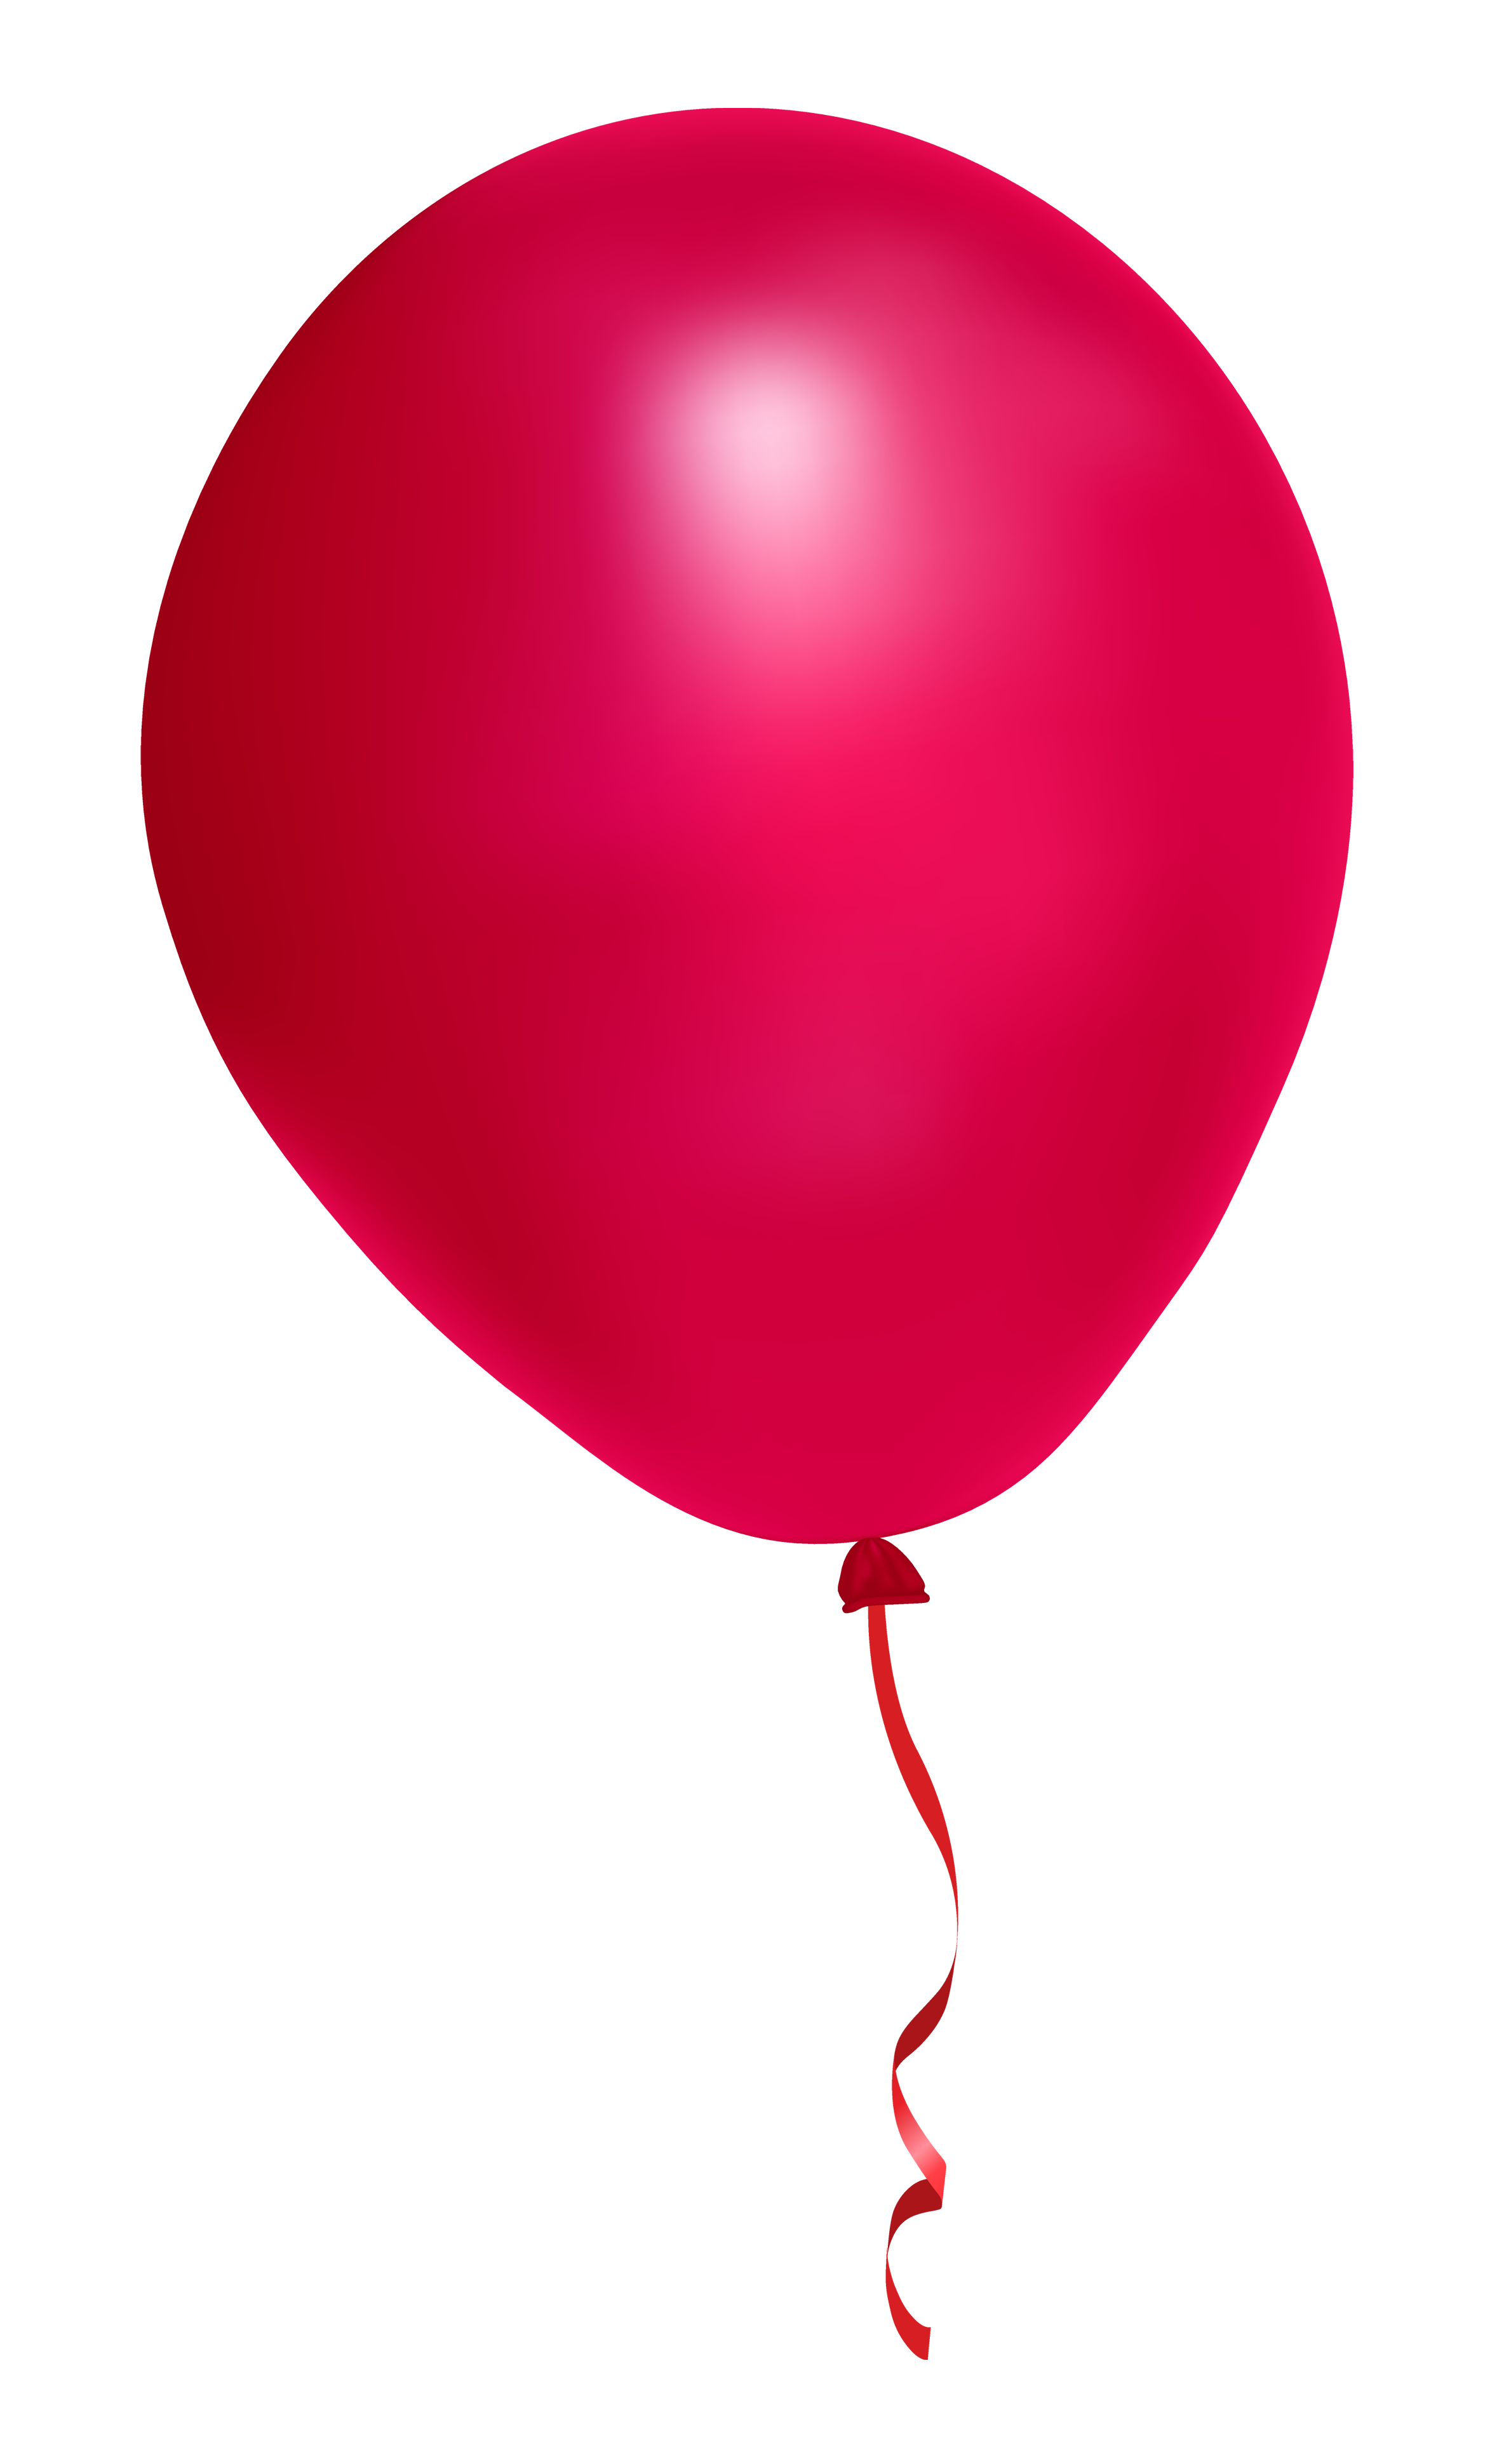 Balloons PNG File